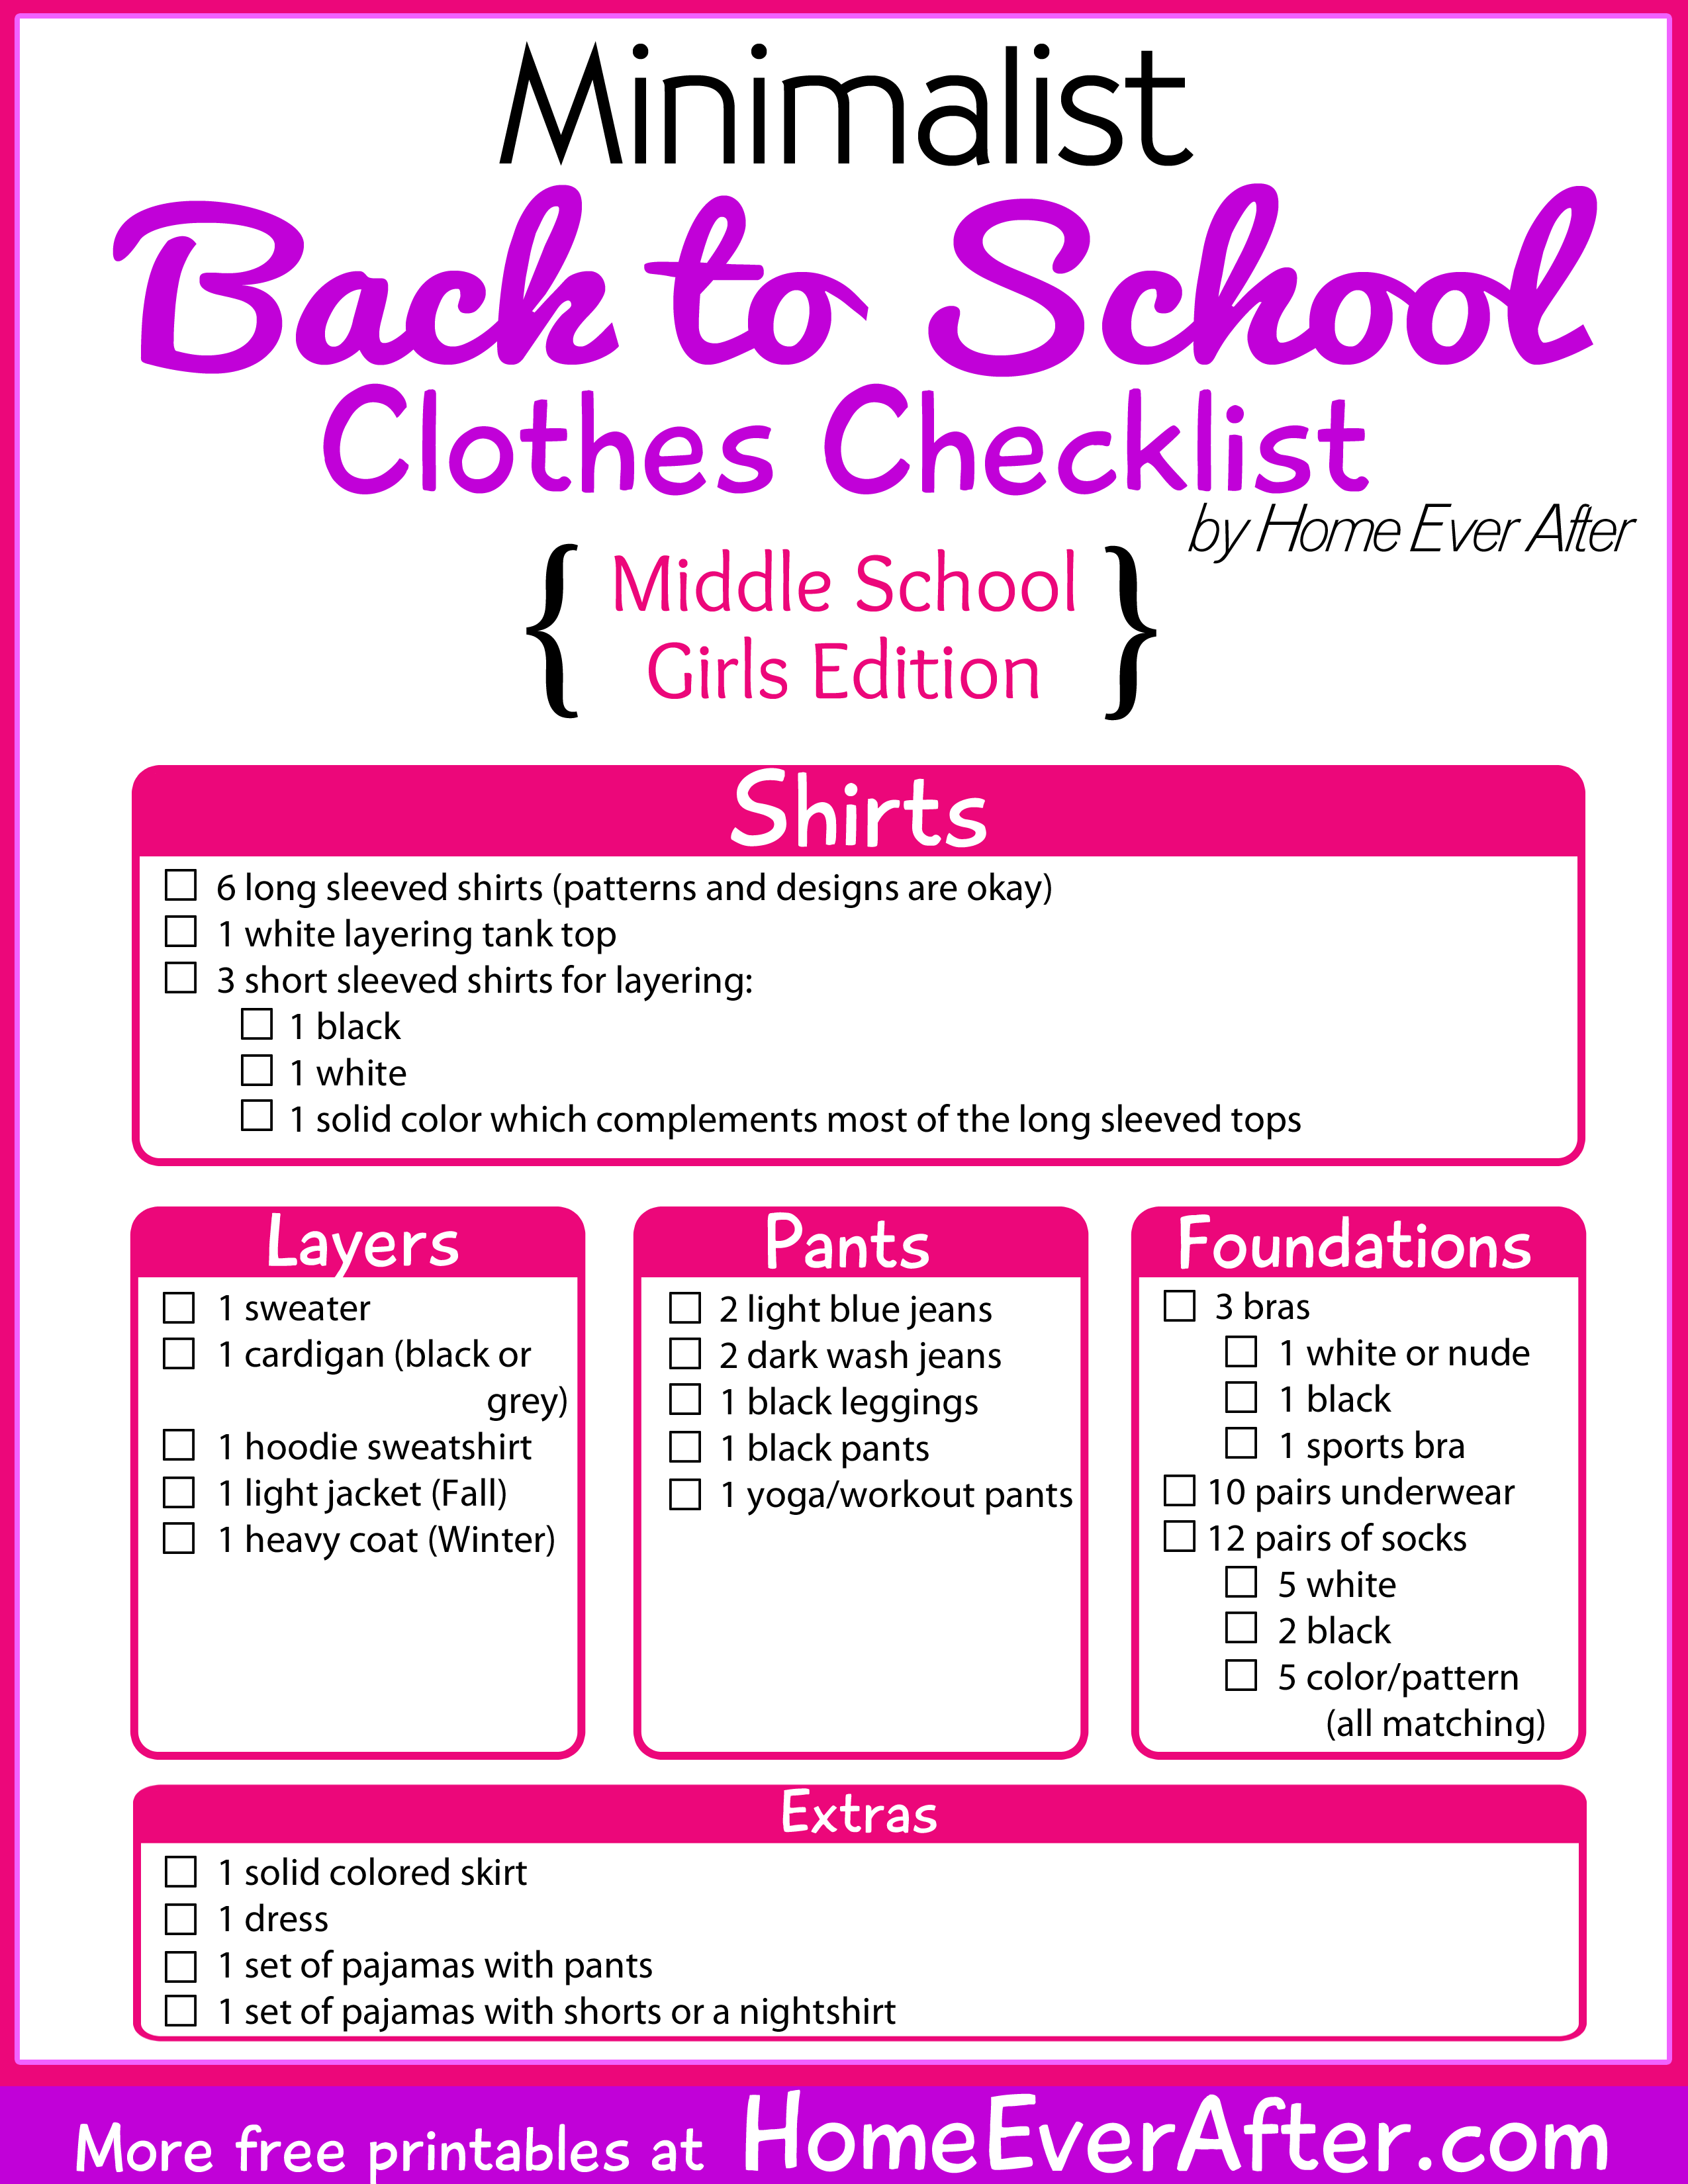 https://homeeverafter.com/Printables/Minimalist-Back-to-School-Middle-School-Checklist-Printable.png